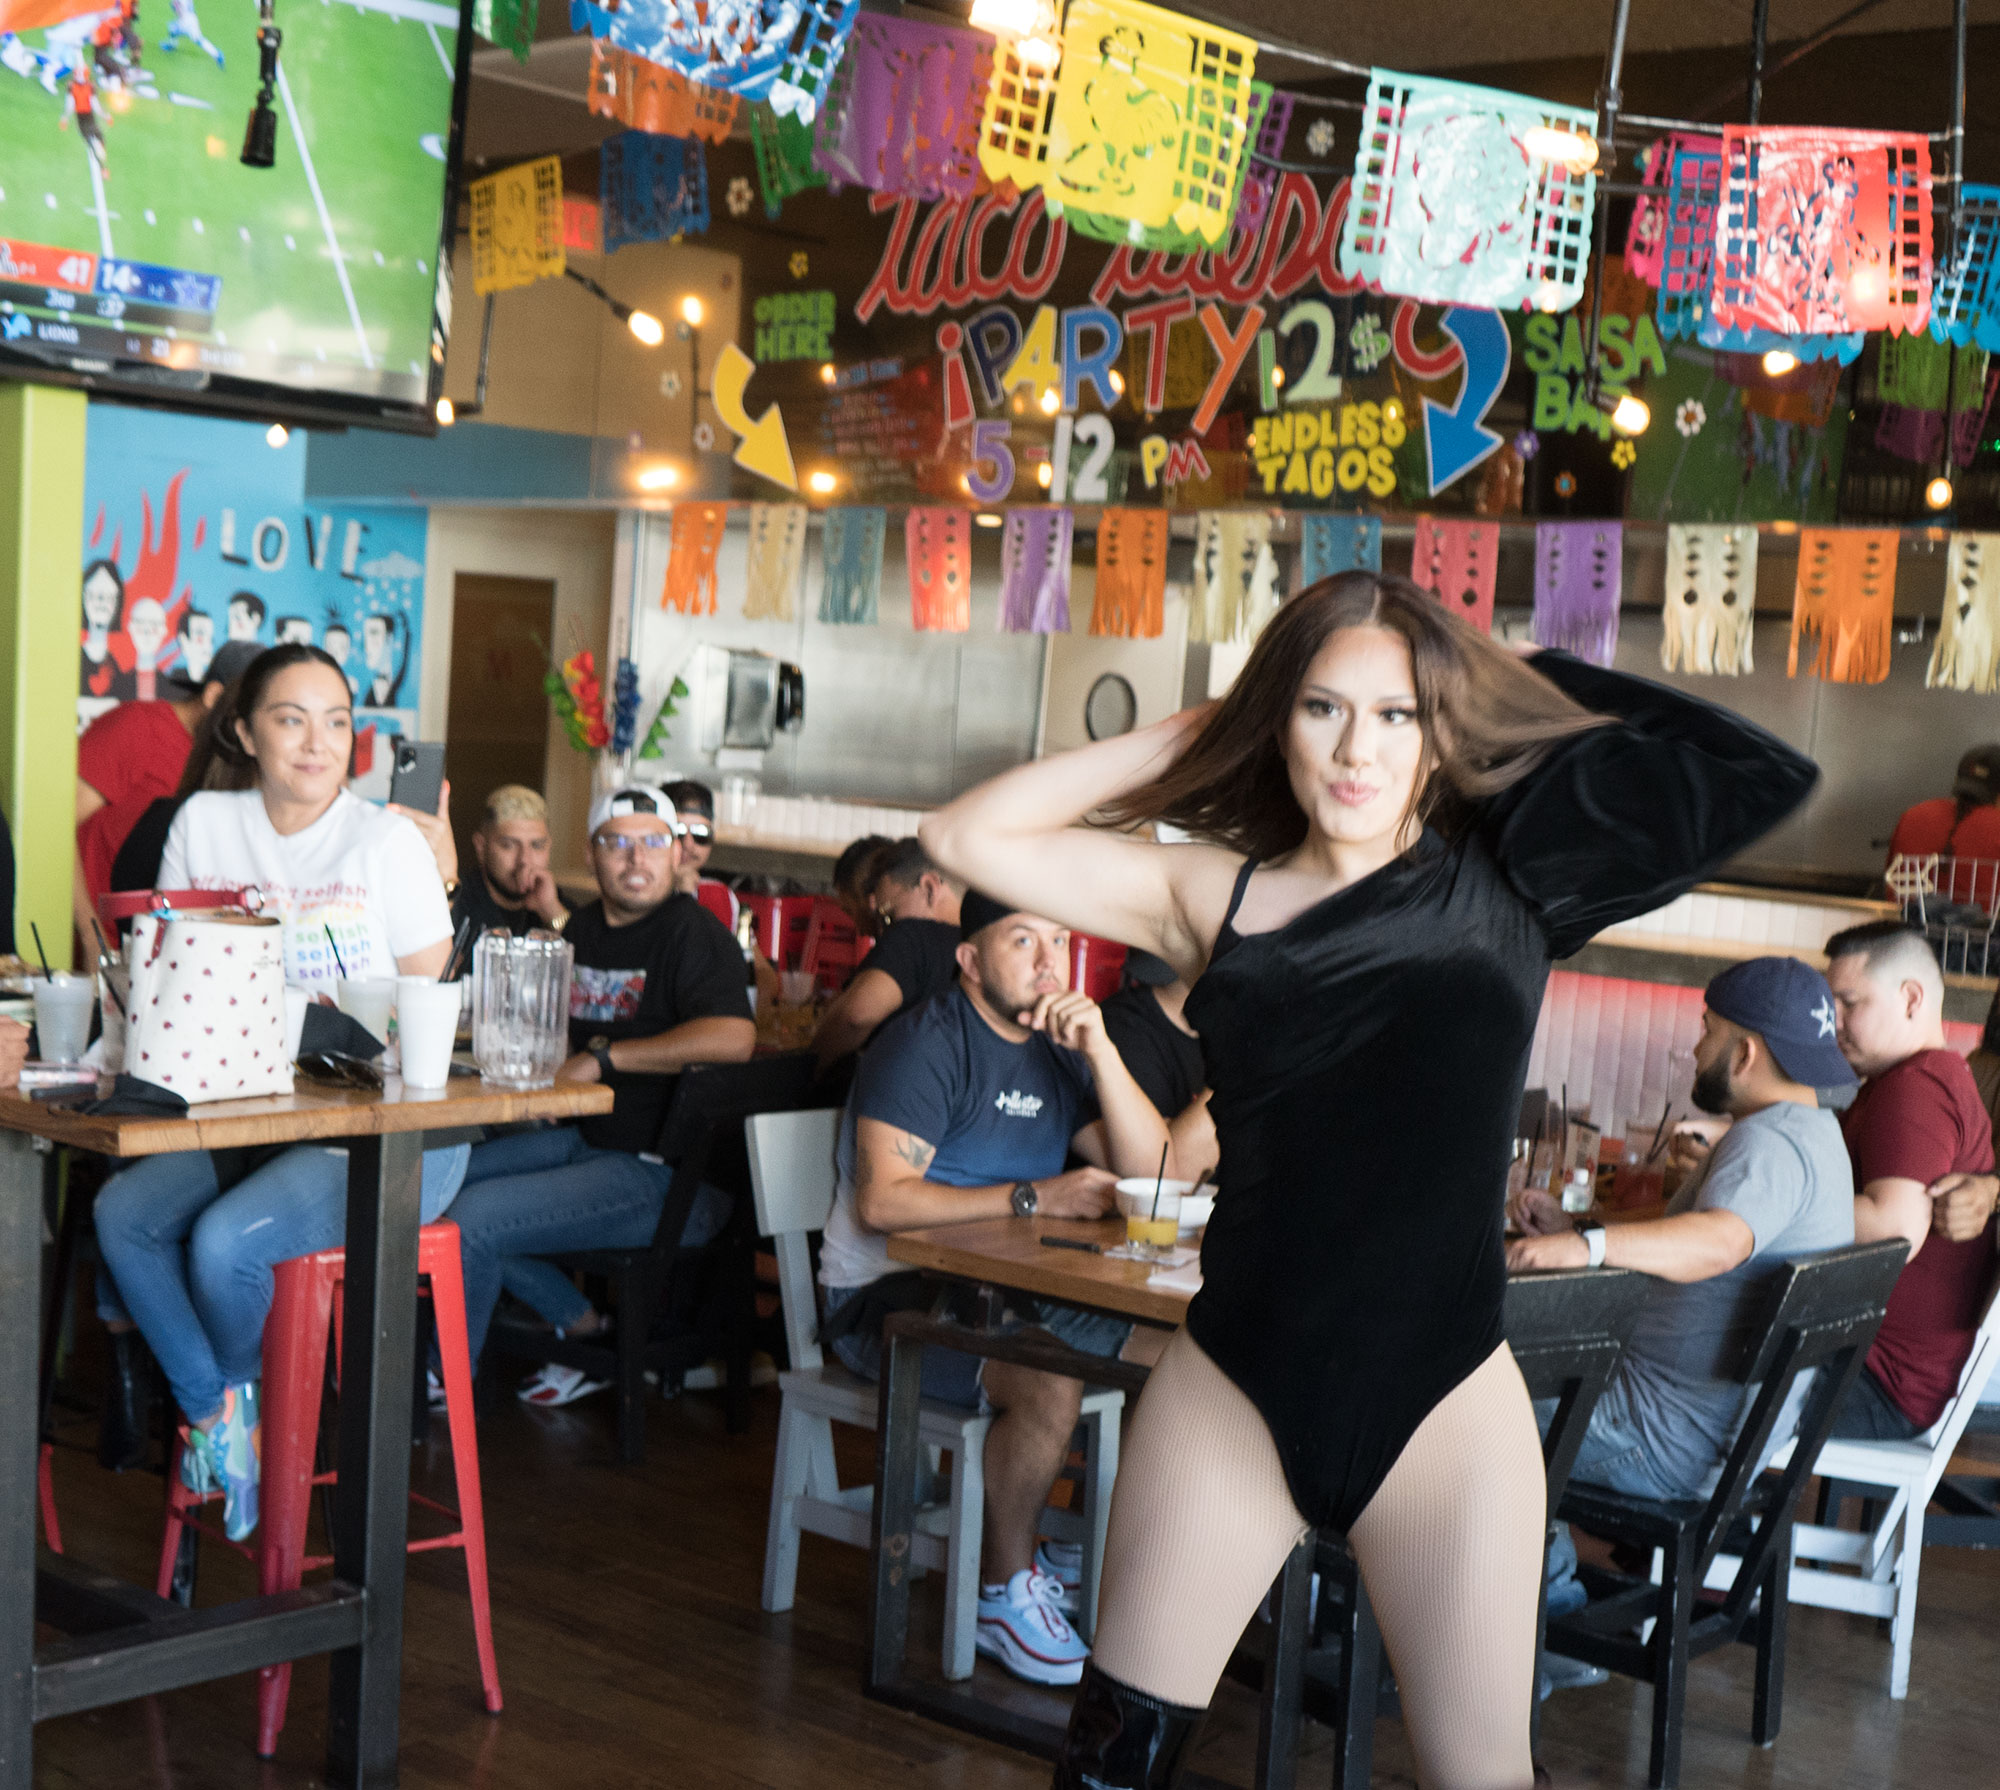 Angelique Majesty at TNT Taco and Tequila drag brunch in Dallas.